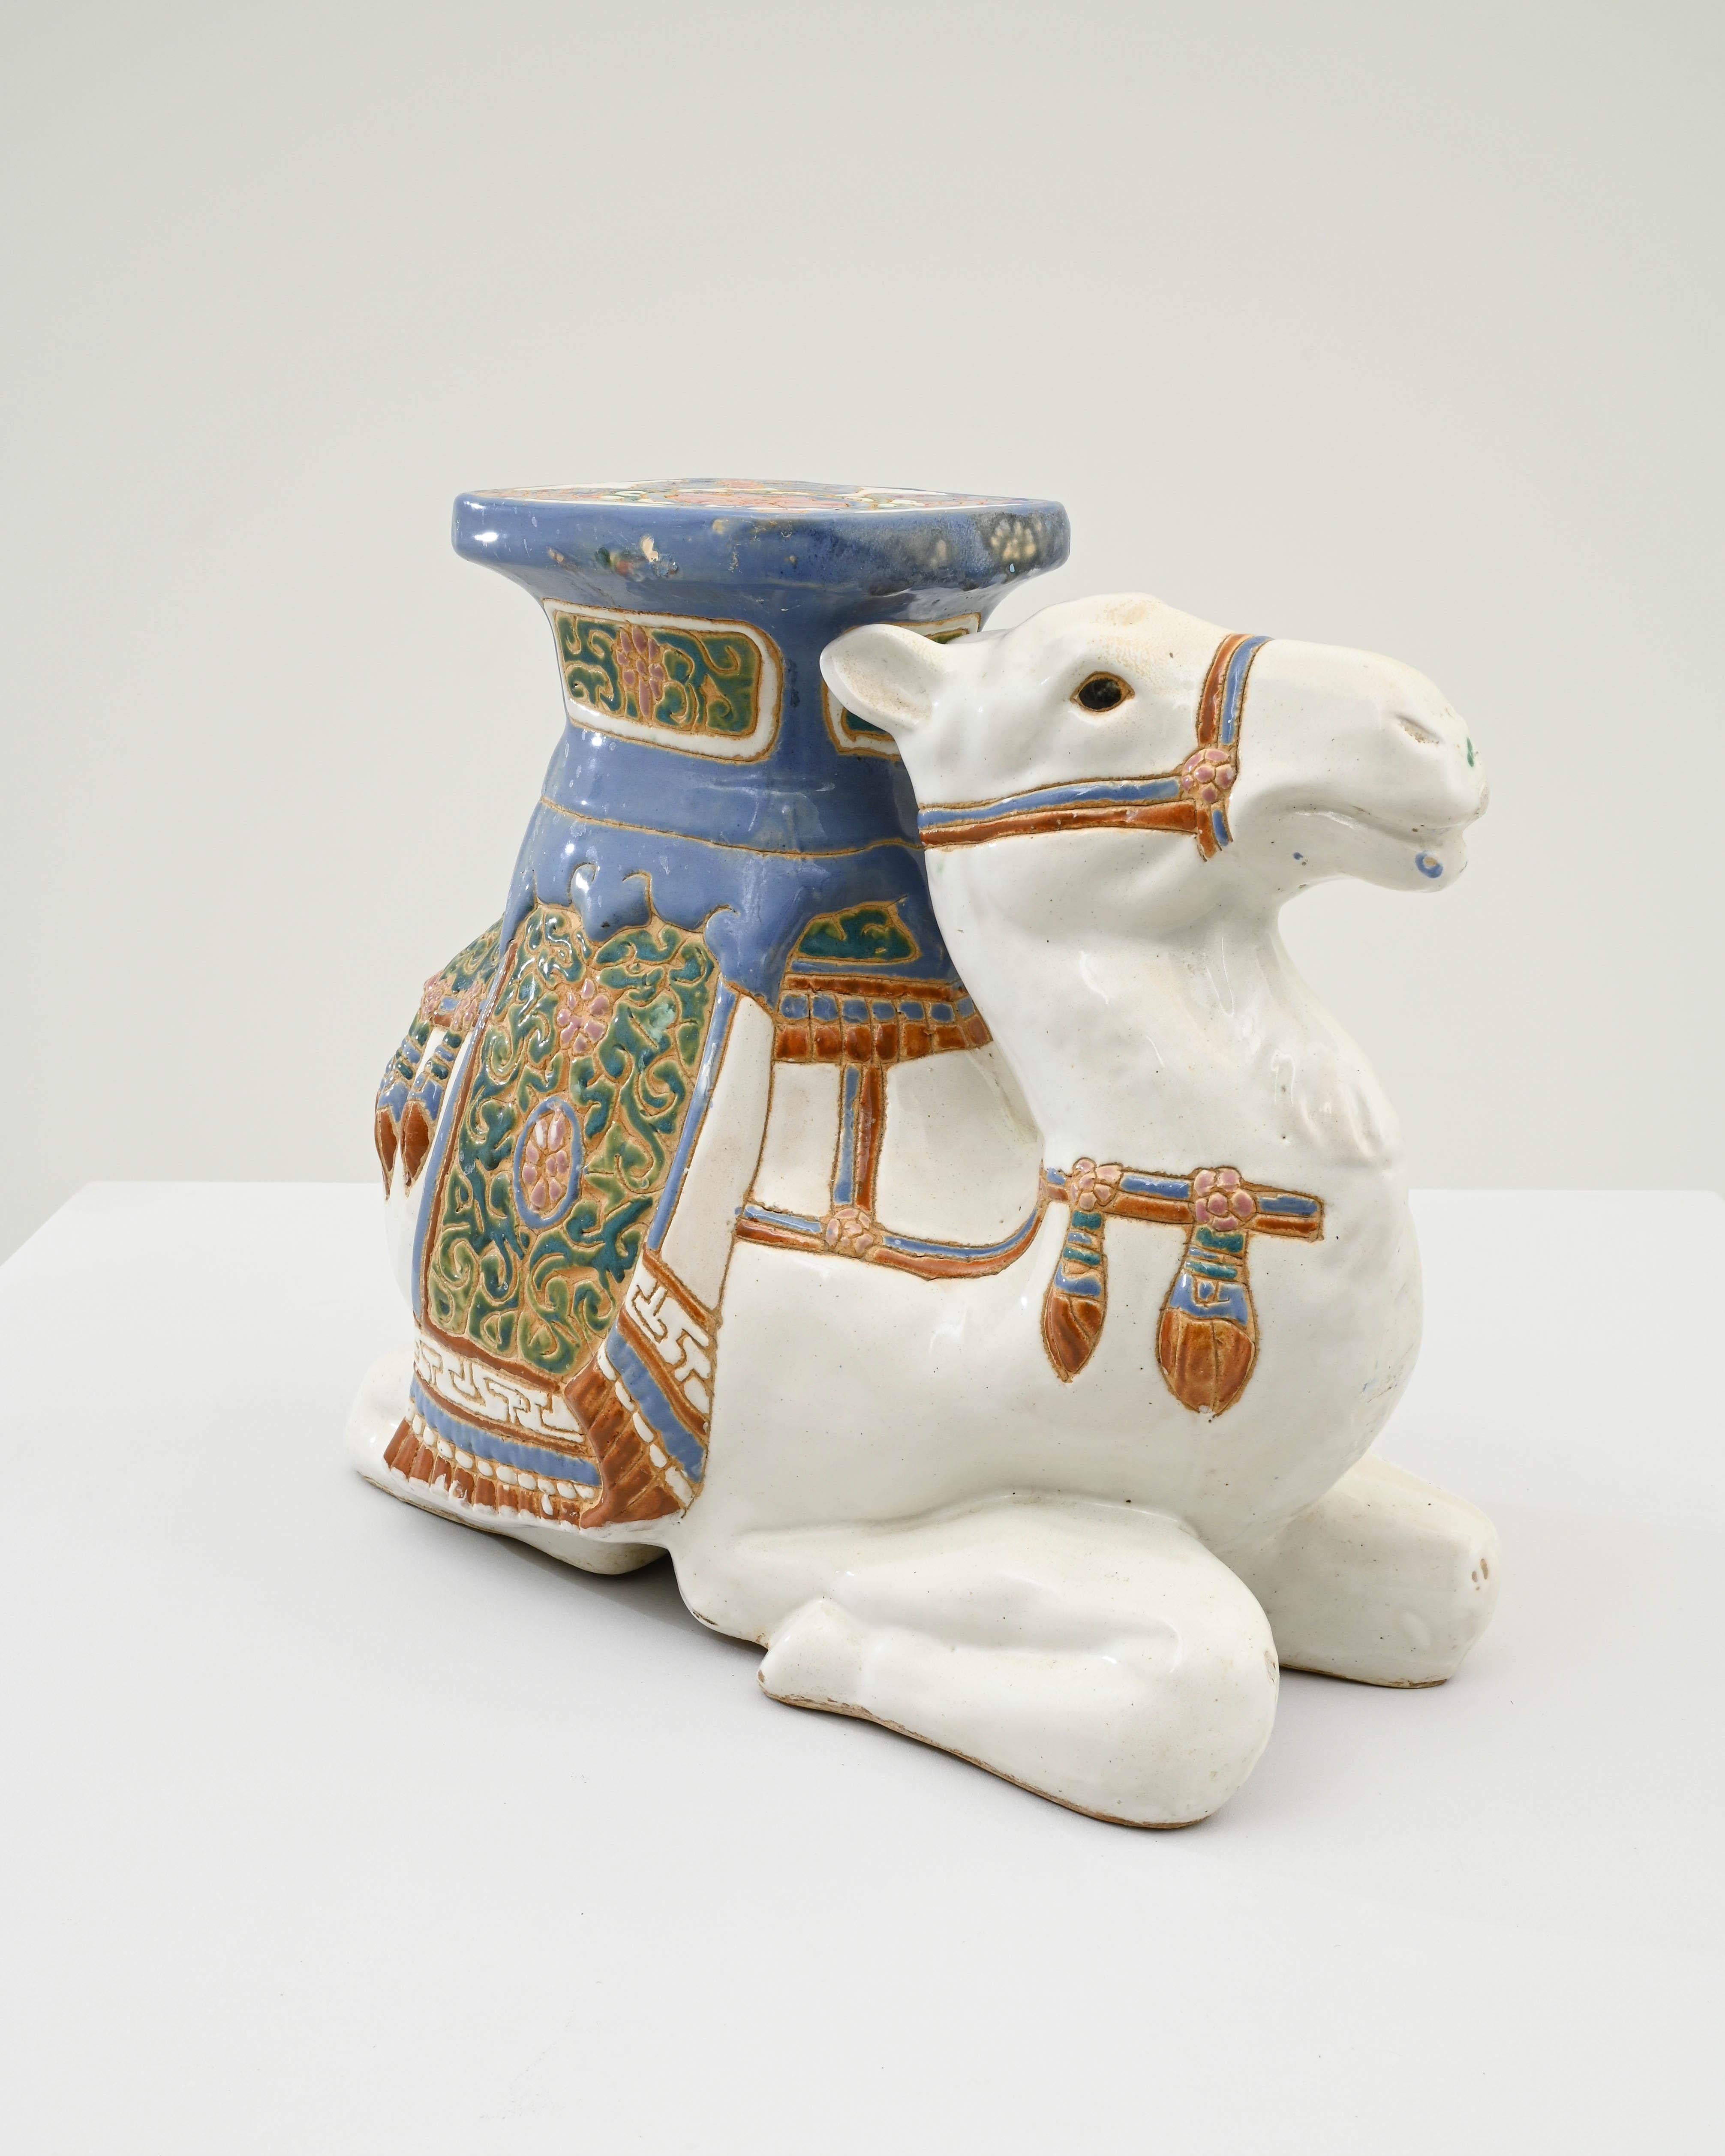 This ceramic sitting camel was crafted in France, circa 1960. A poised figure, this tranquil camel flaunts an immaculate white glaze and an impressive mahawi - camel saddle - ornamented with moresque motifs. The elegant fringes of the saddle are